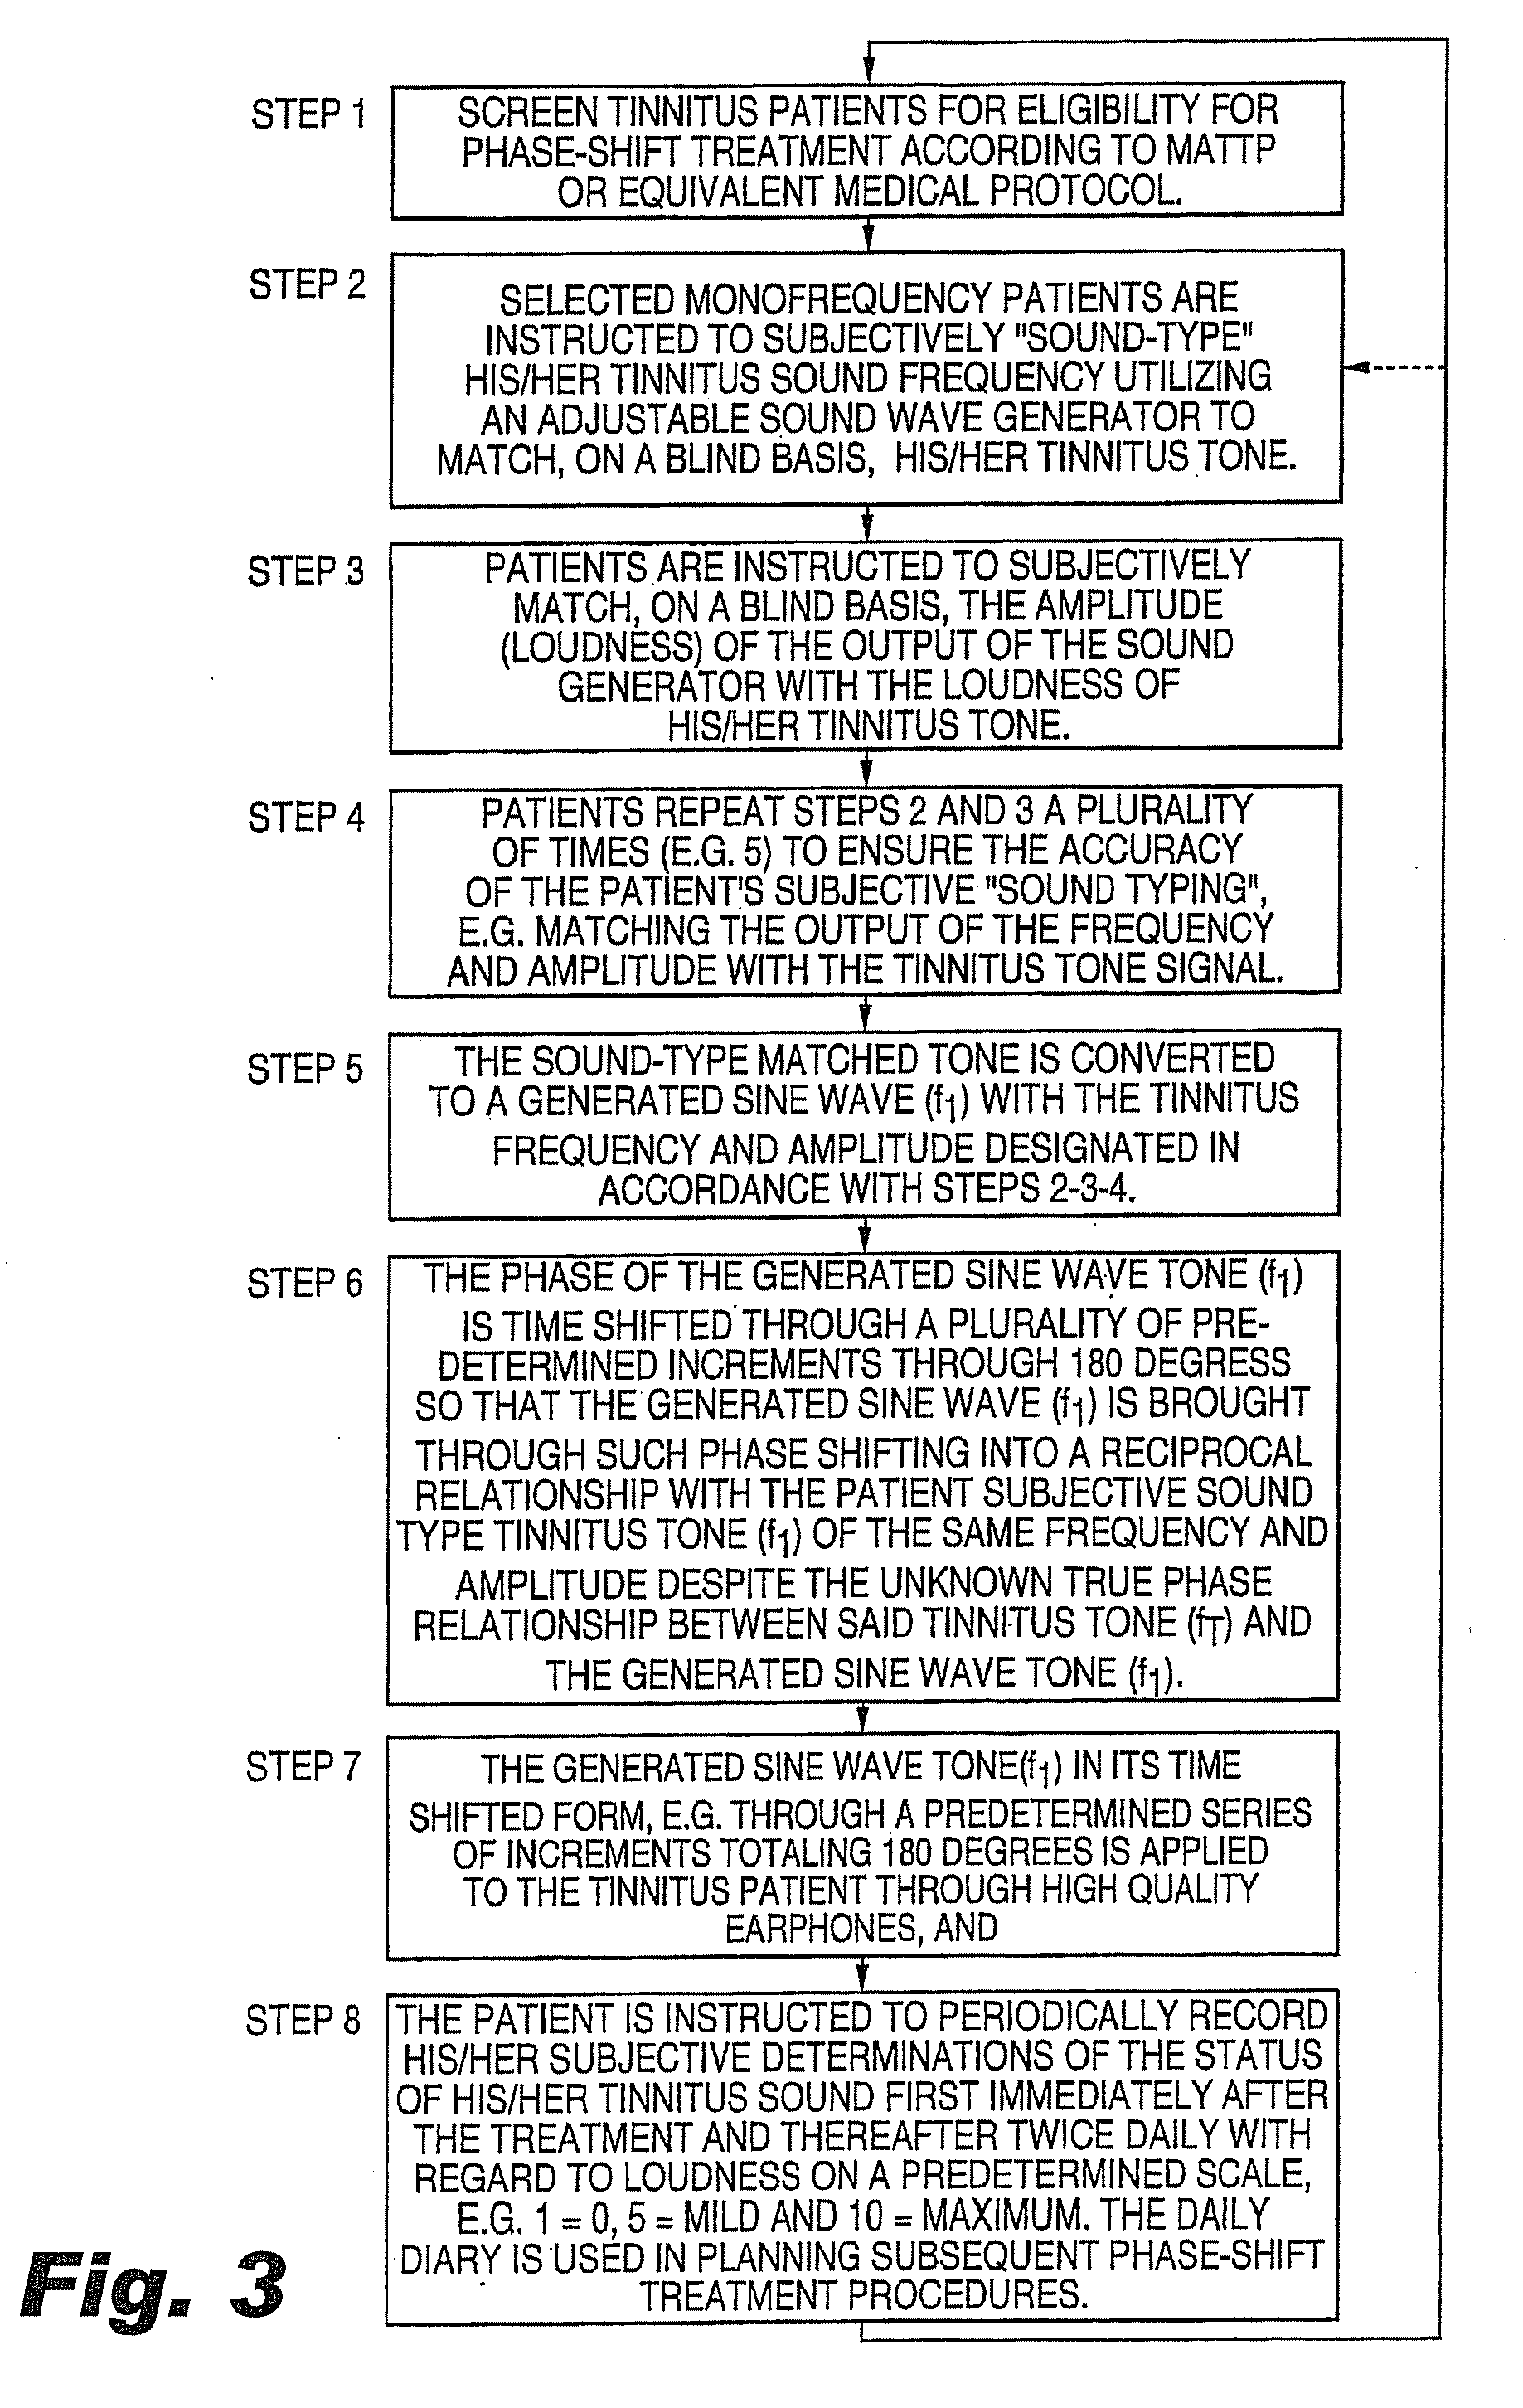 Method and Apparatus for Treatment of Monofrequency Tinnitus Utilizing Sound Wave Cancellation Techniques